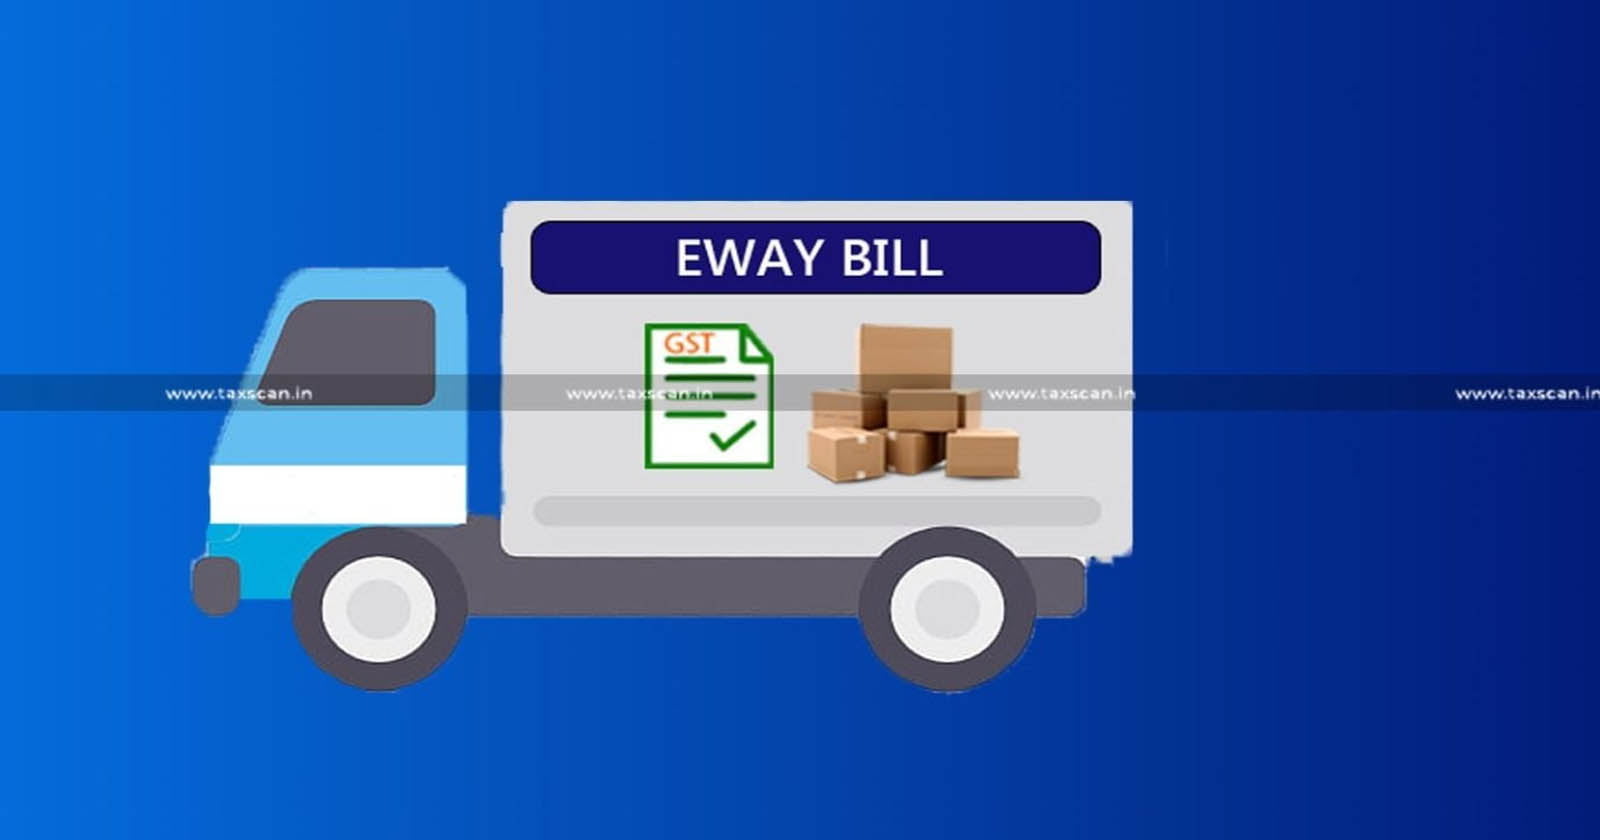 Important Update - Authentication - E-Way Bill - E-Invoice System - Taxpayers - taxscan